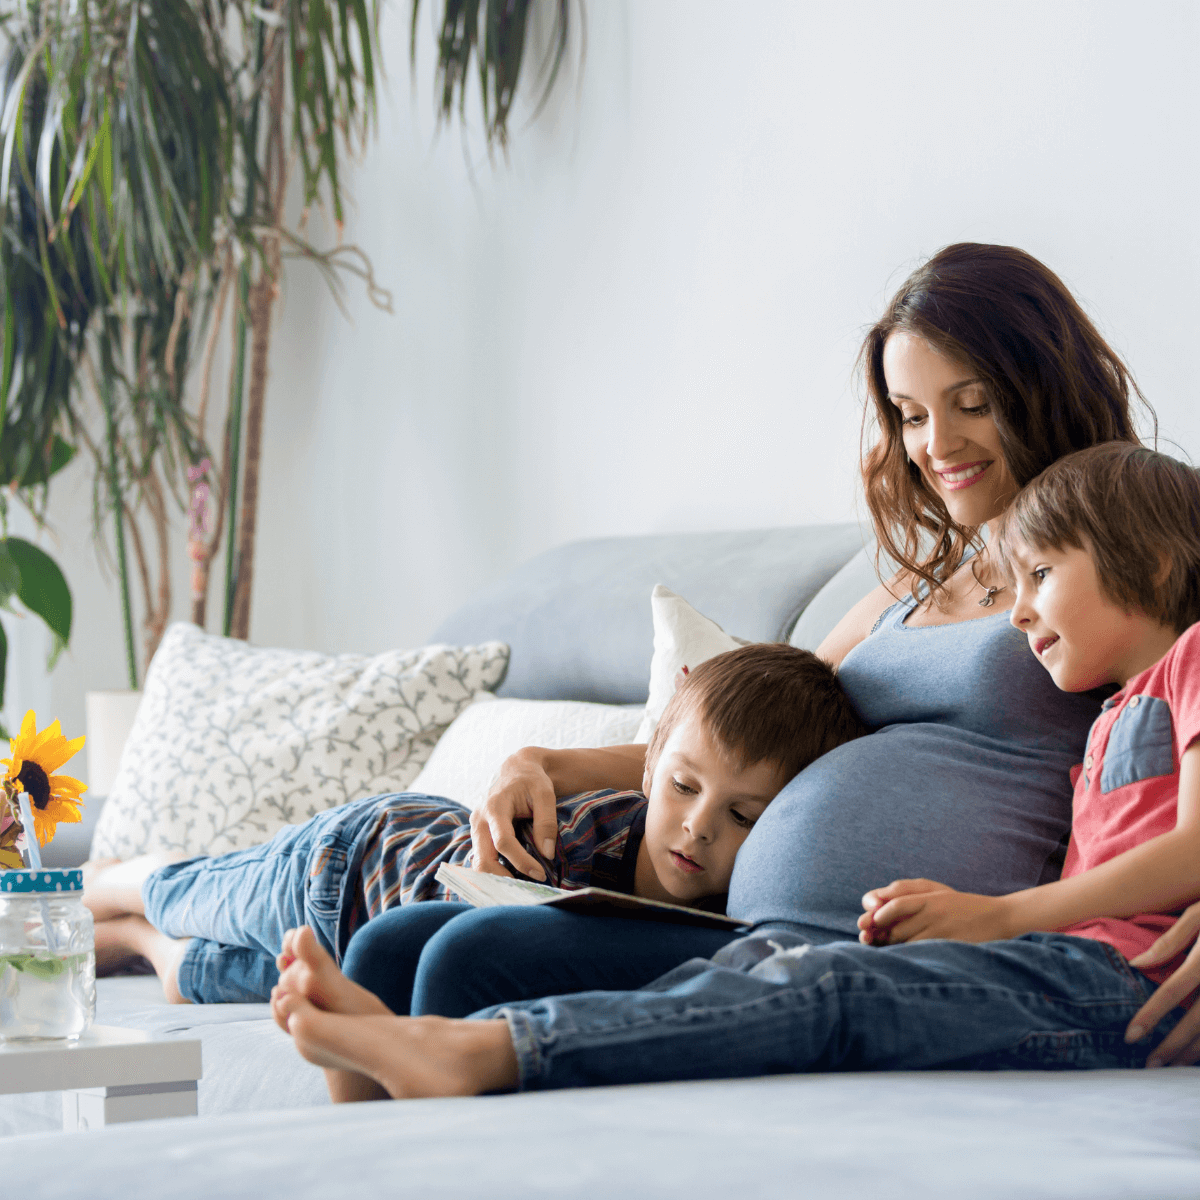 Find air quality solutions for your familiy